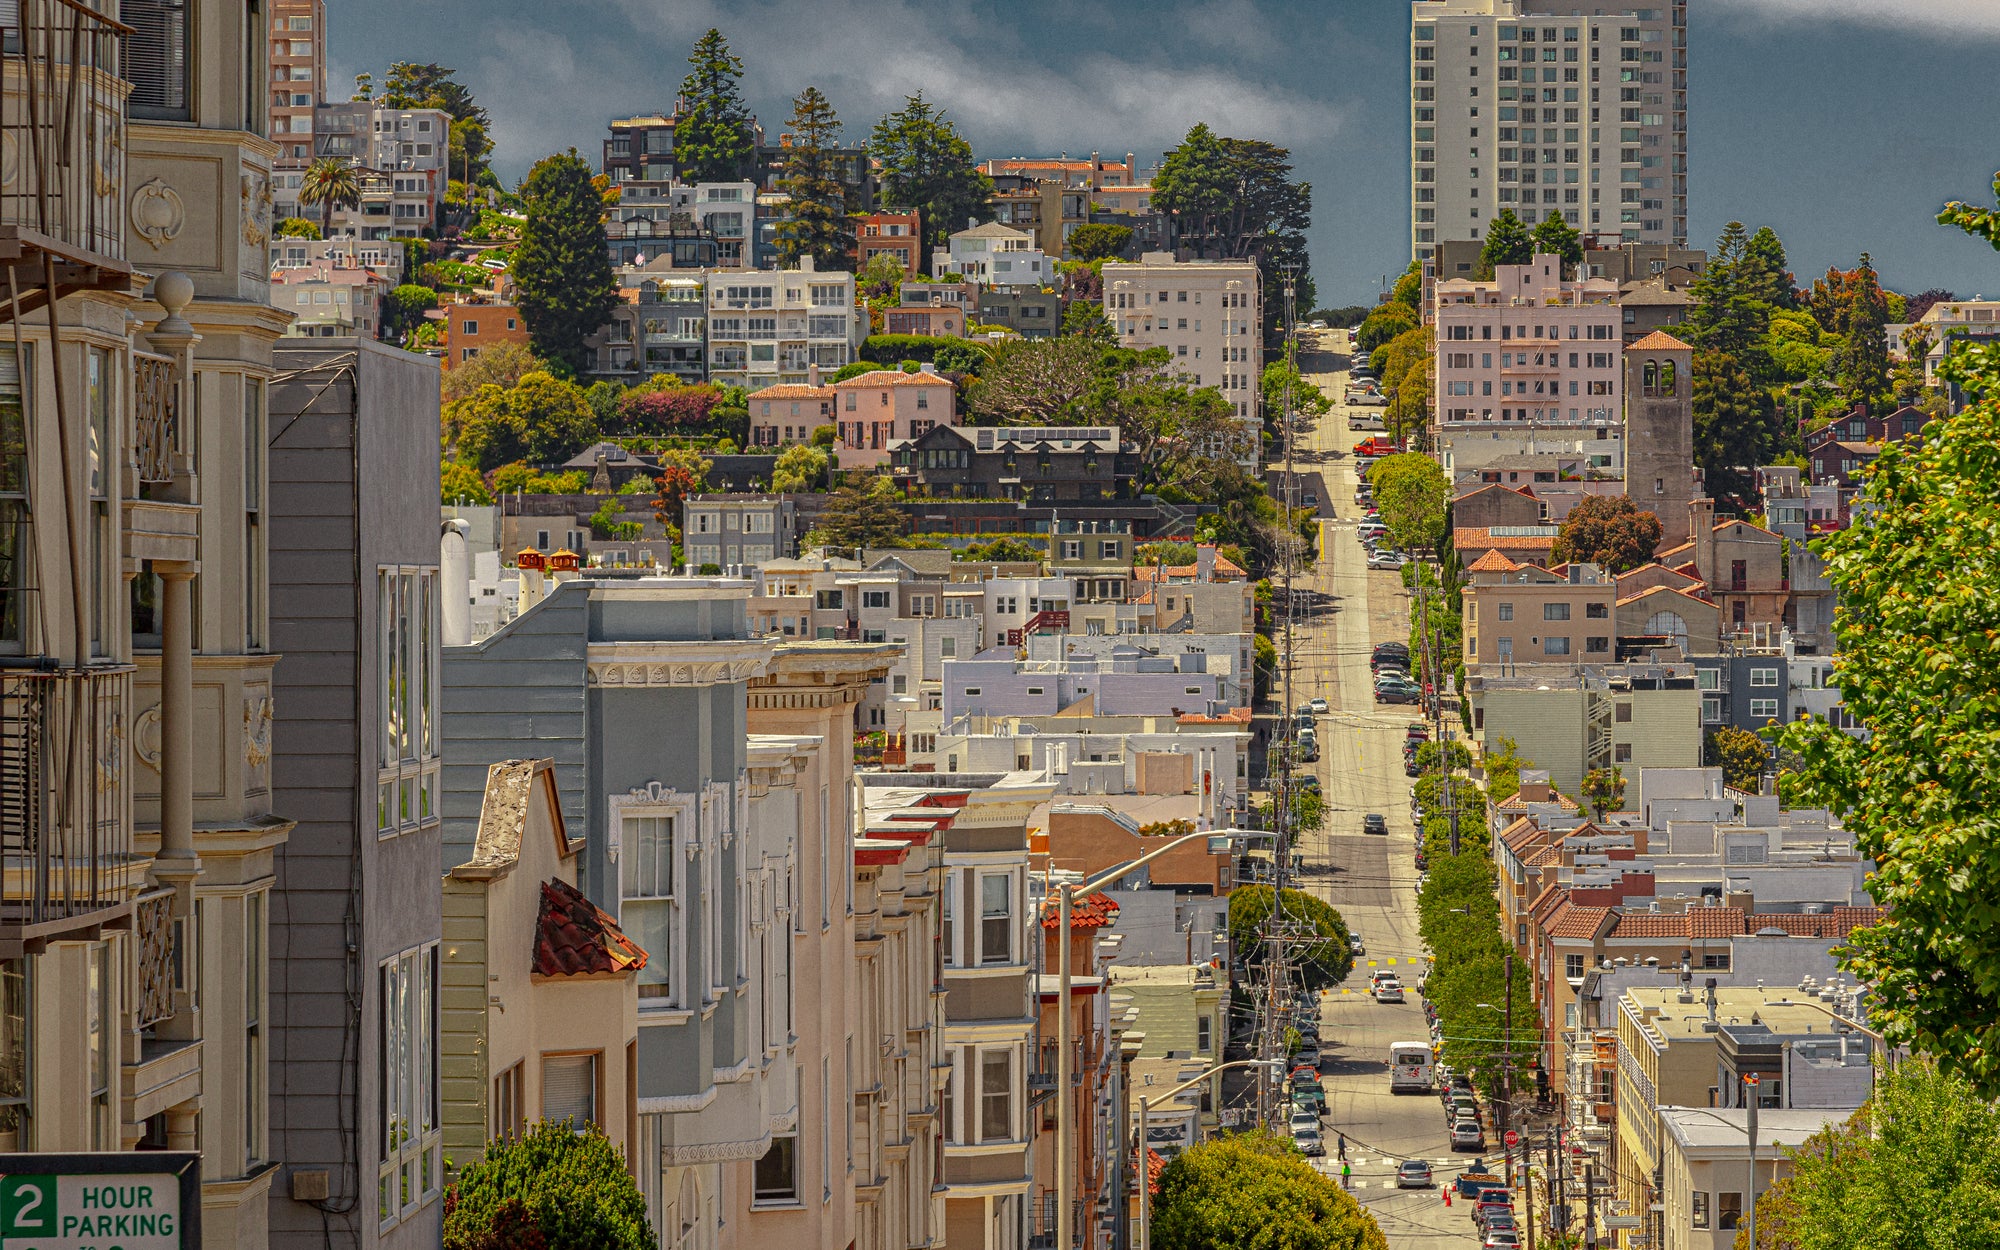 From Telegraph Hill